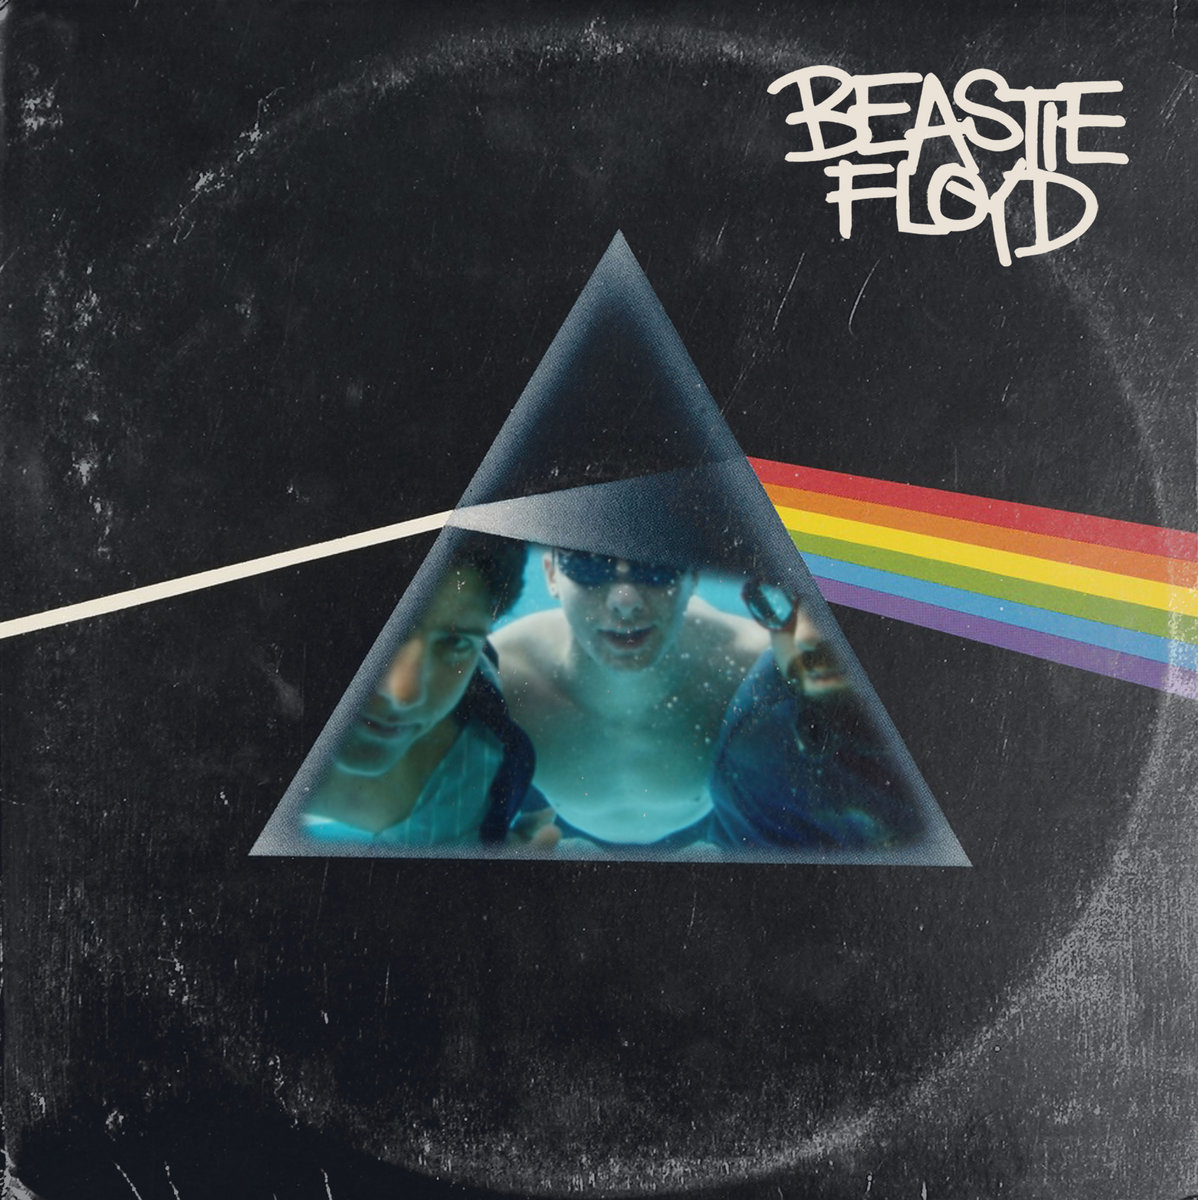 DJ Bacon Returns with Beastie Boys and Pink Floyd Mash-up Album BEASTIE FLOYD with Remixes, Mega-mix and Instrumentals (DJB Bandcamp)